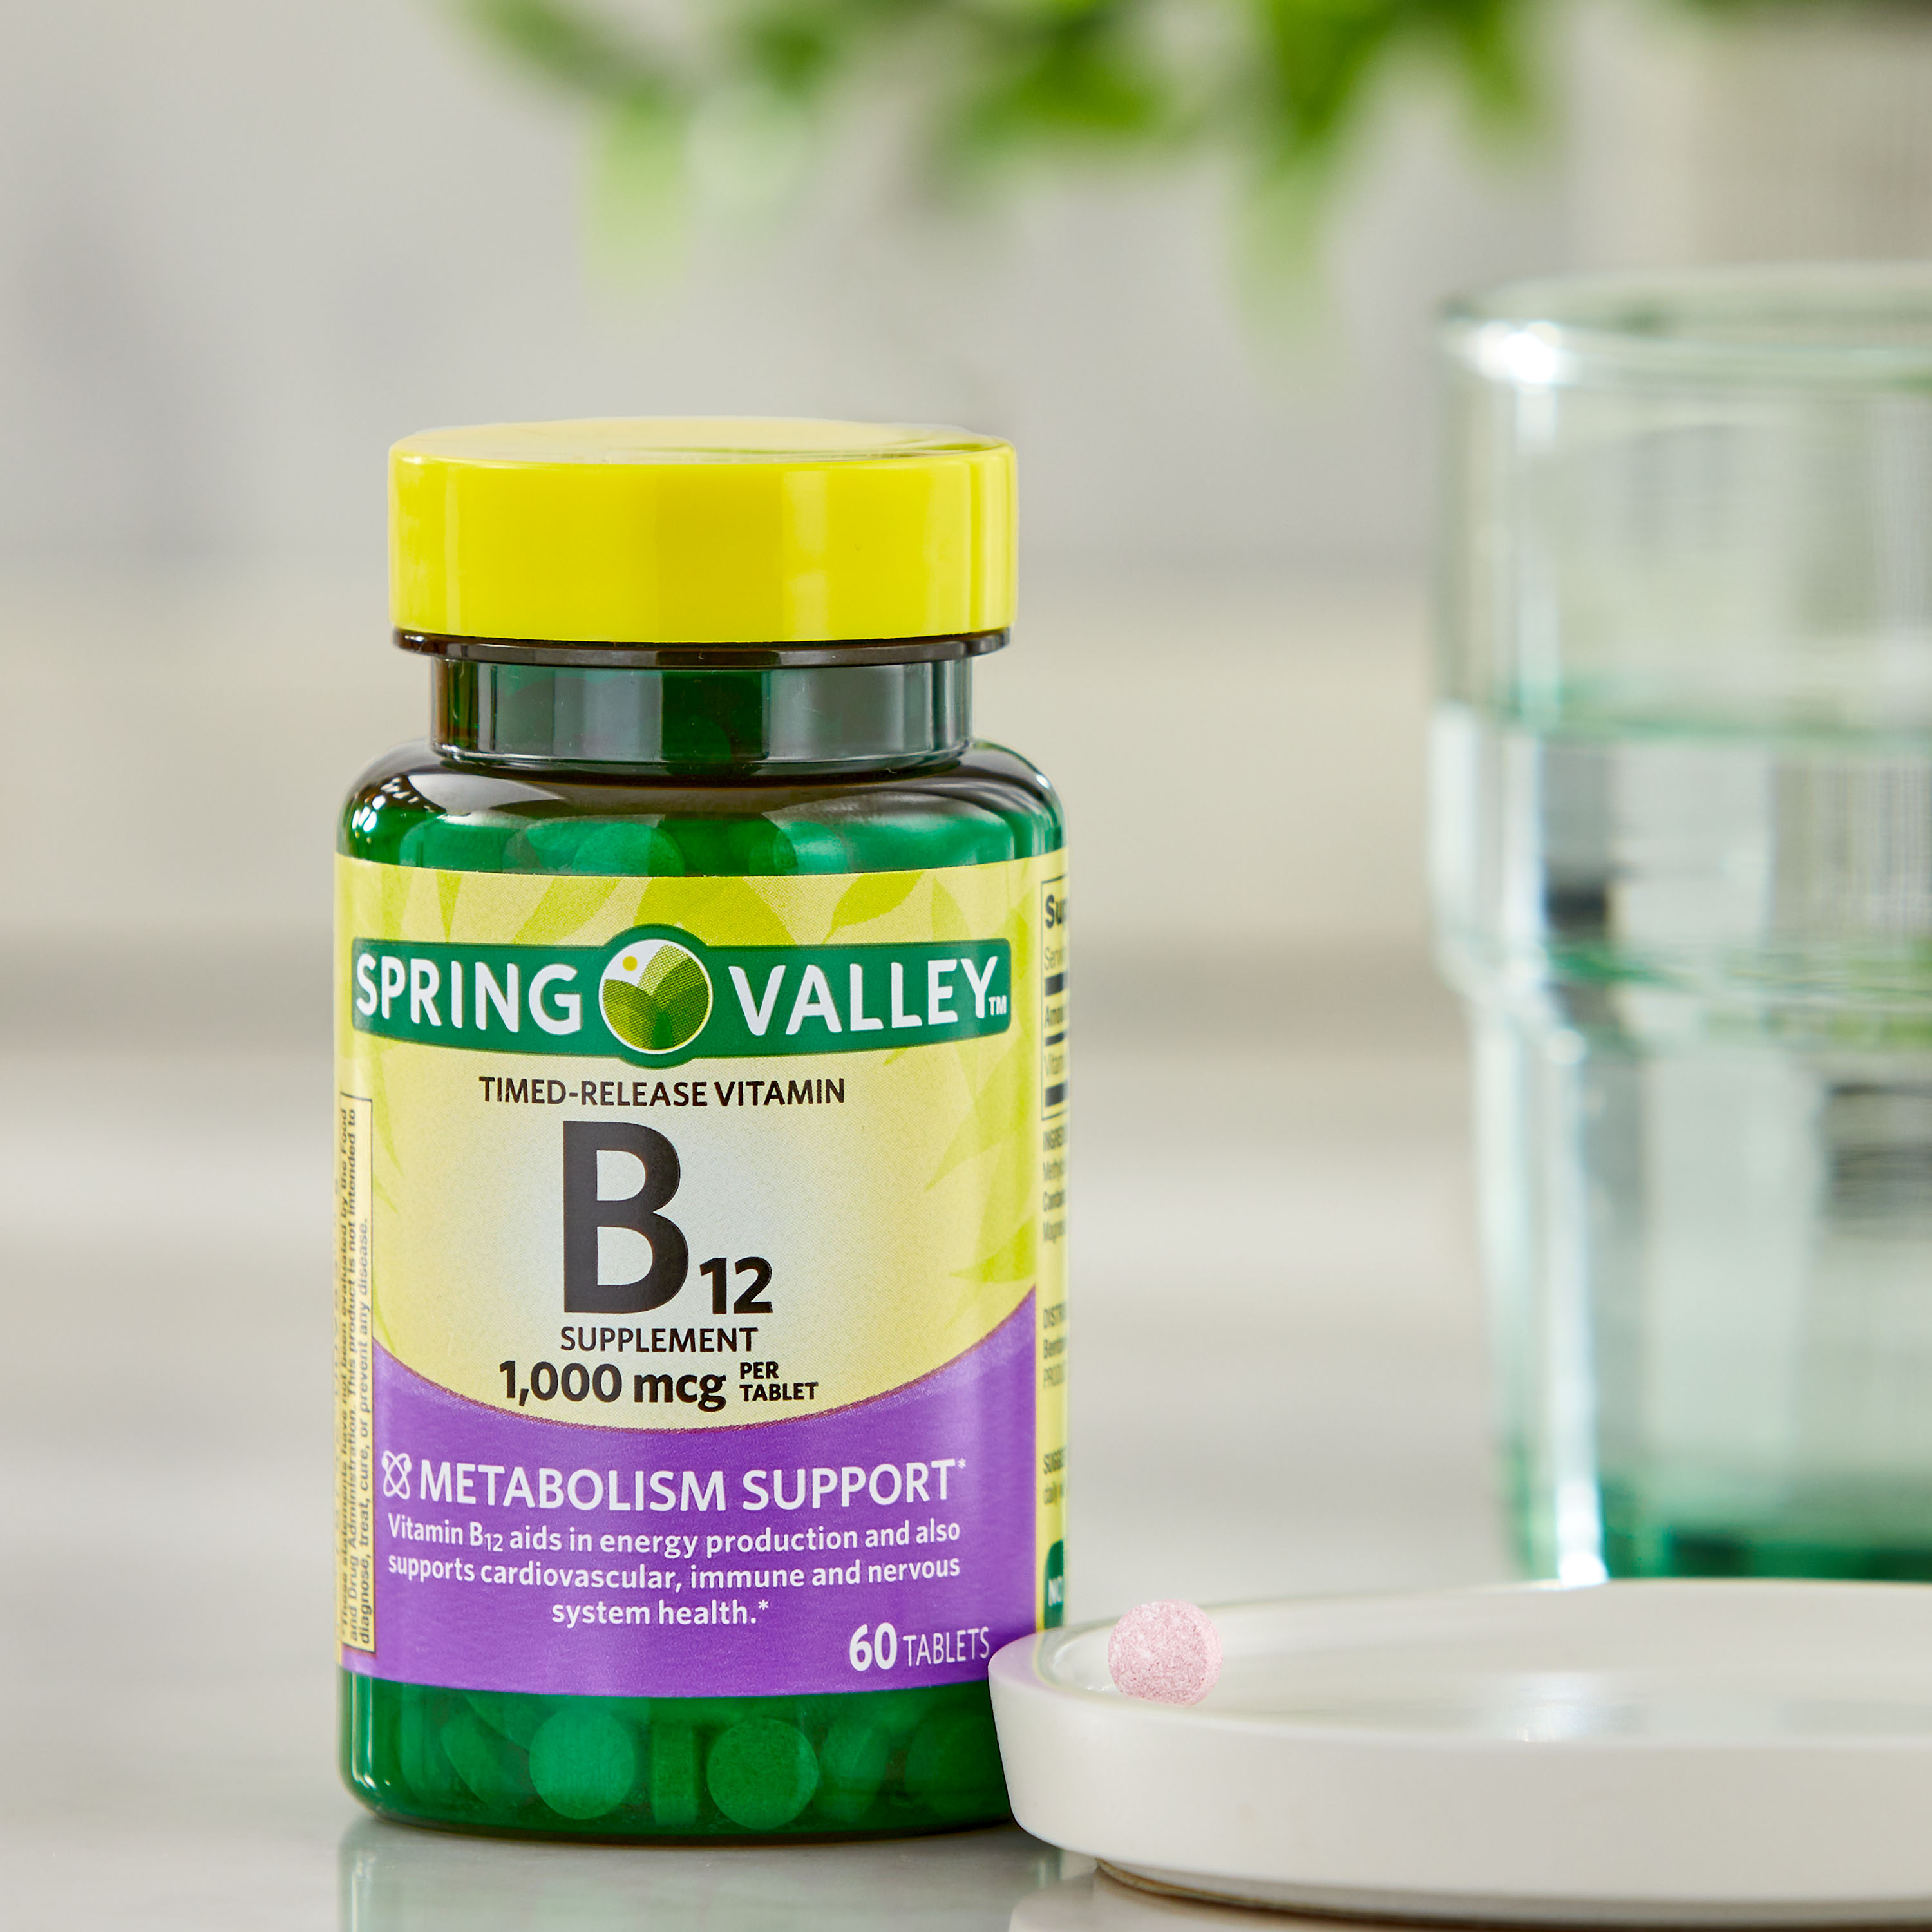 Spring Valley Timed-Release Vitamin B12 Tablets, 1,000 mcg, 60 Count - image 4 of 10